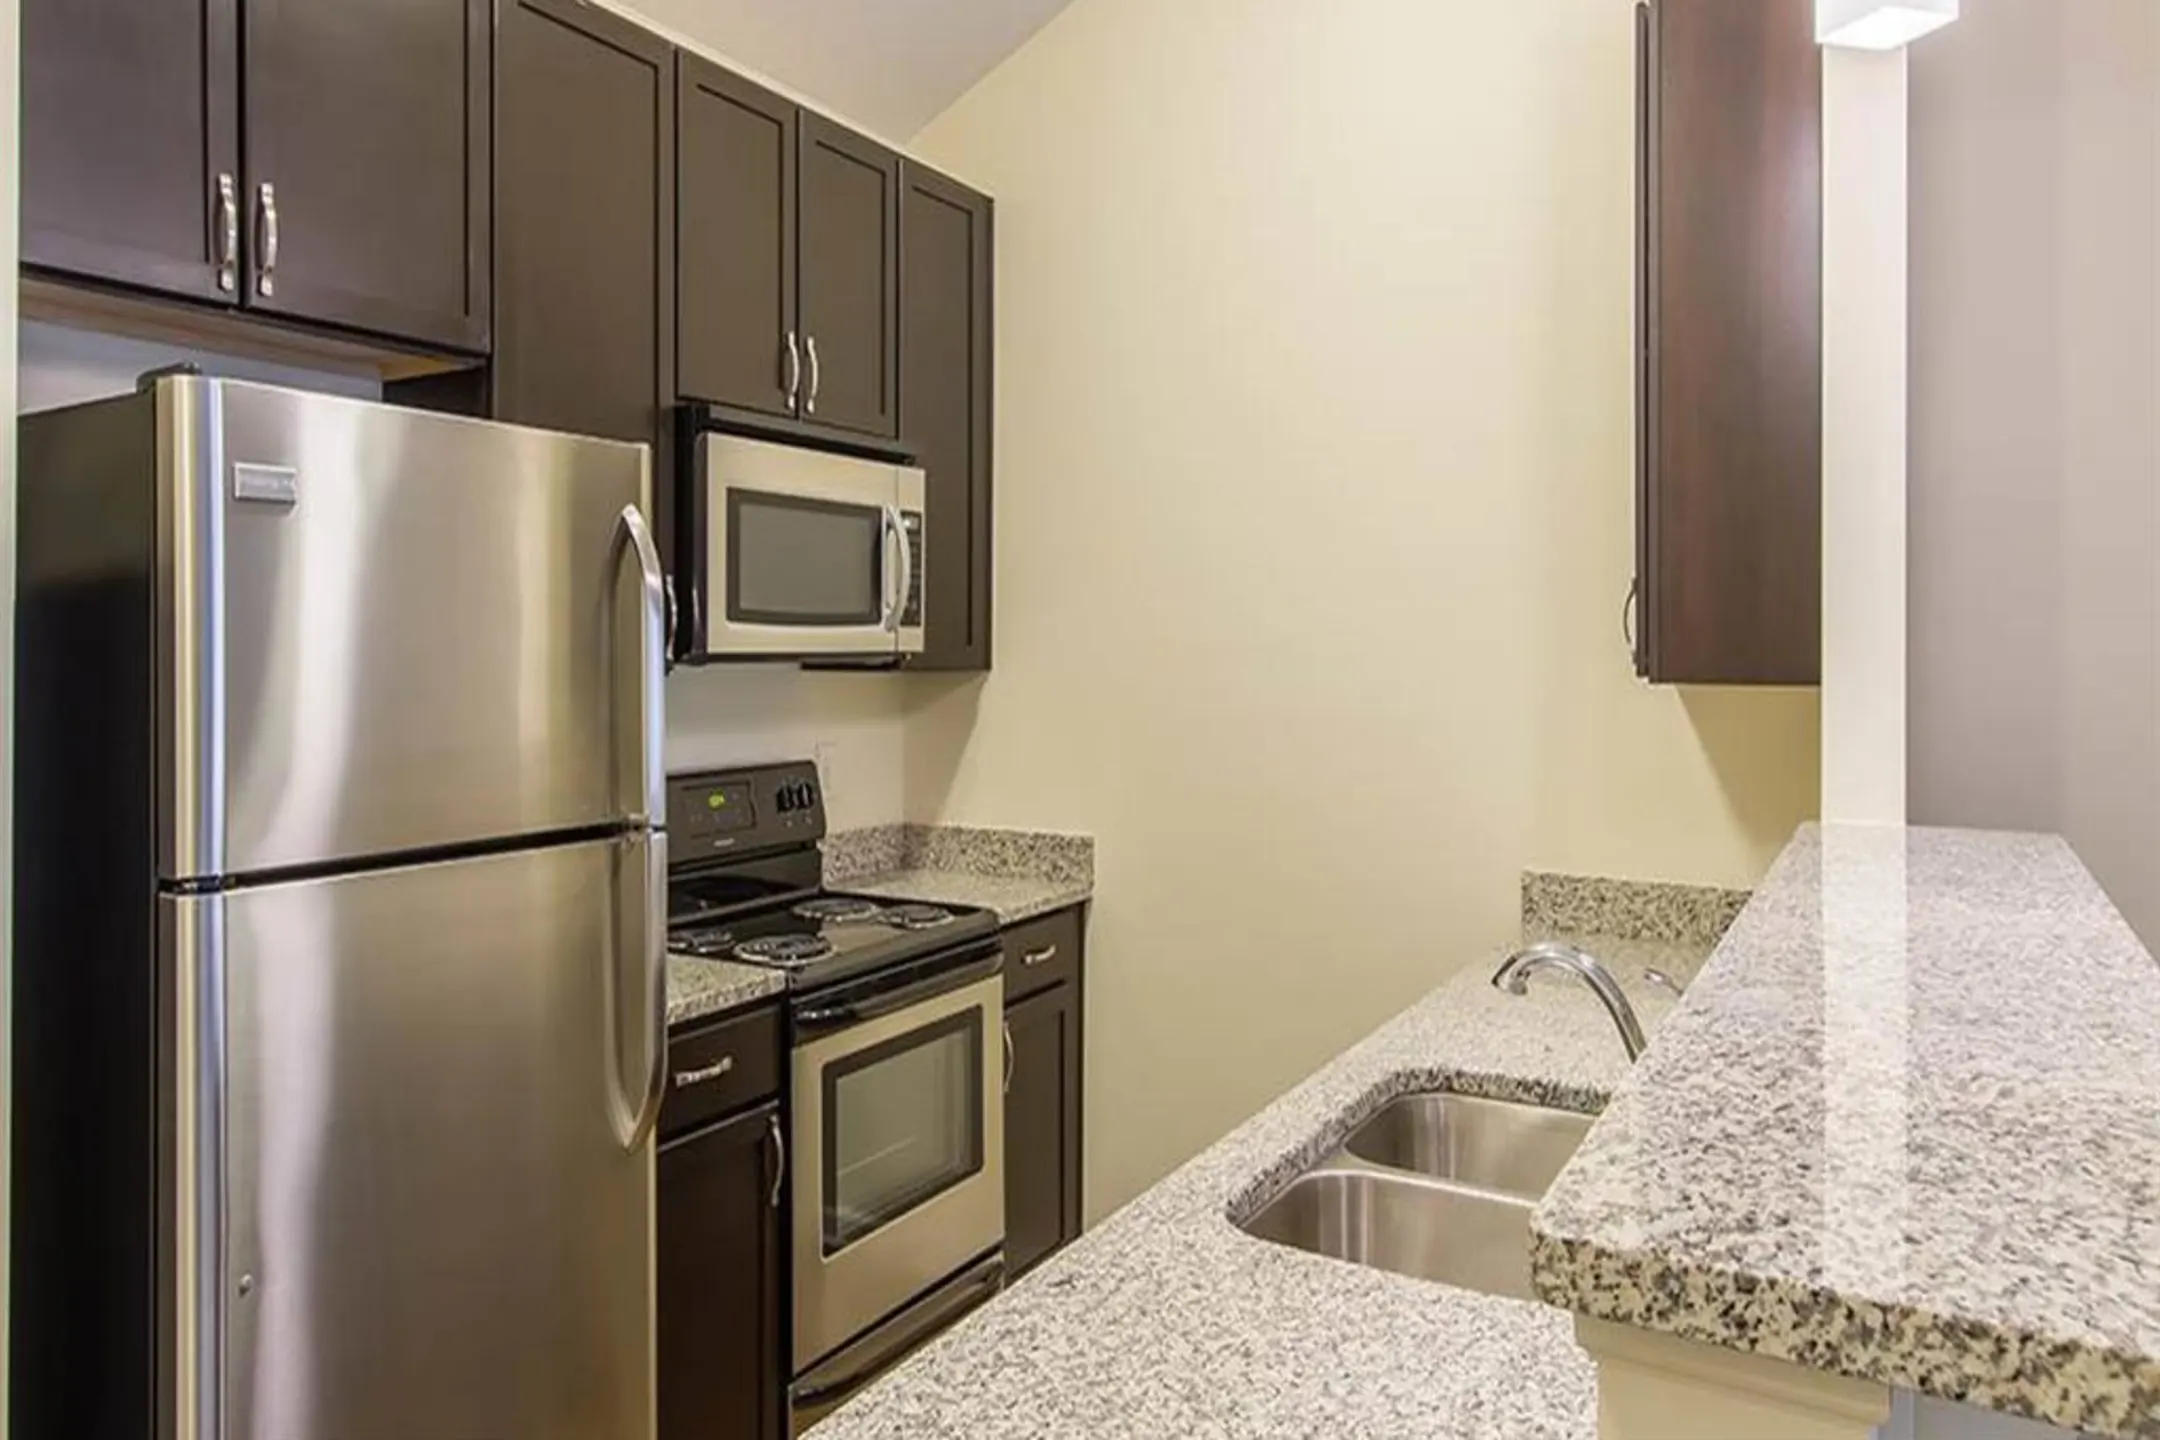 Kitchen - Ethan Pointe Apartments - Rochester, NY